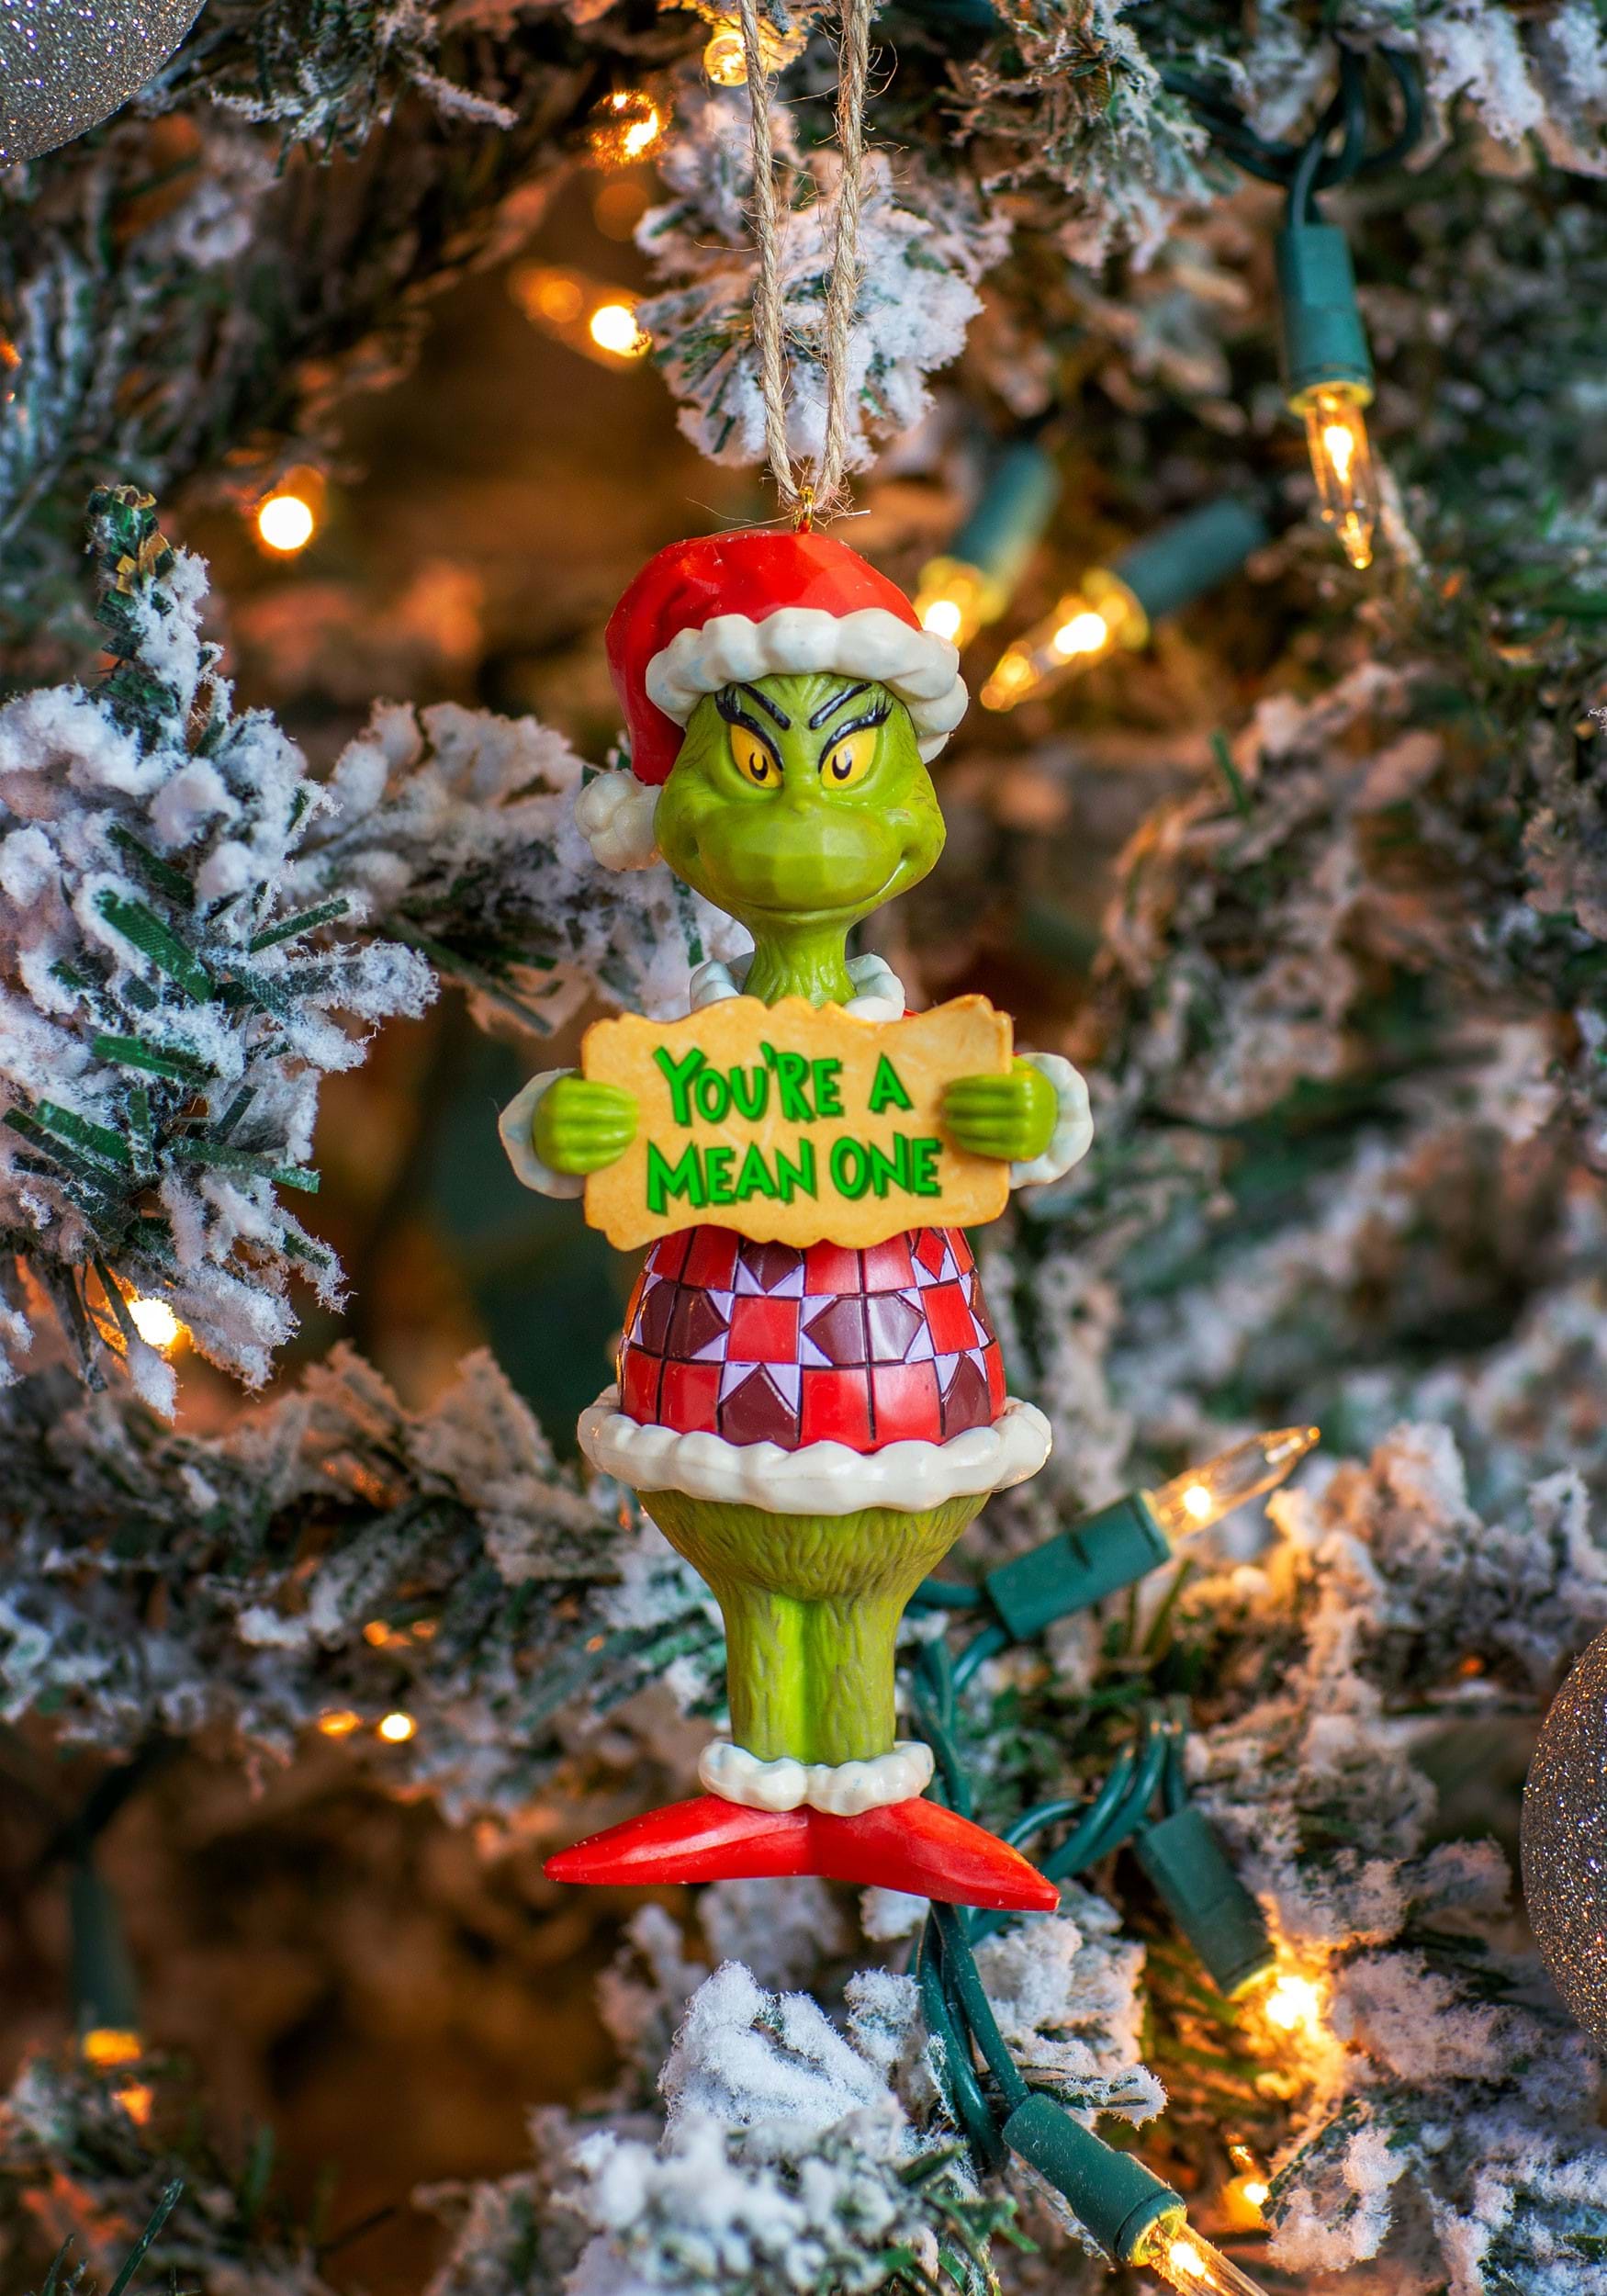 Grinch PVC Ornament Youre A Mean One By Jim Shore